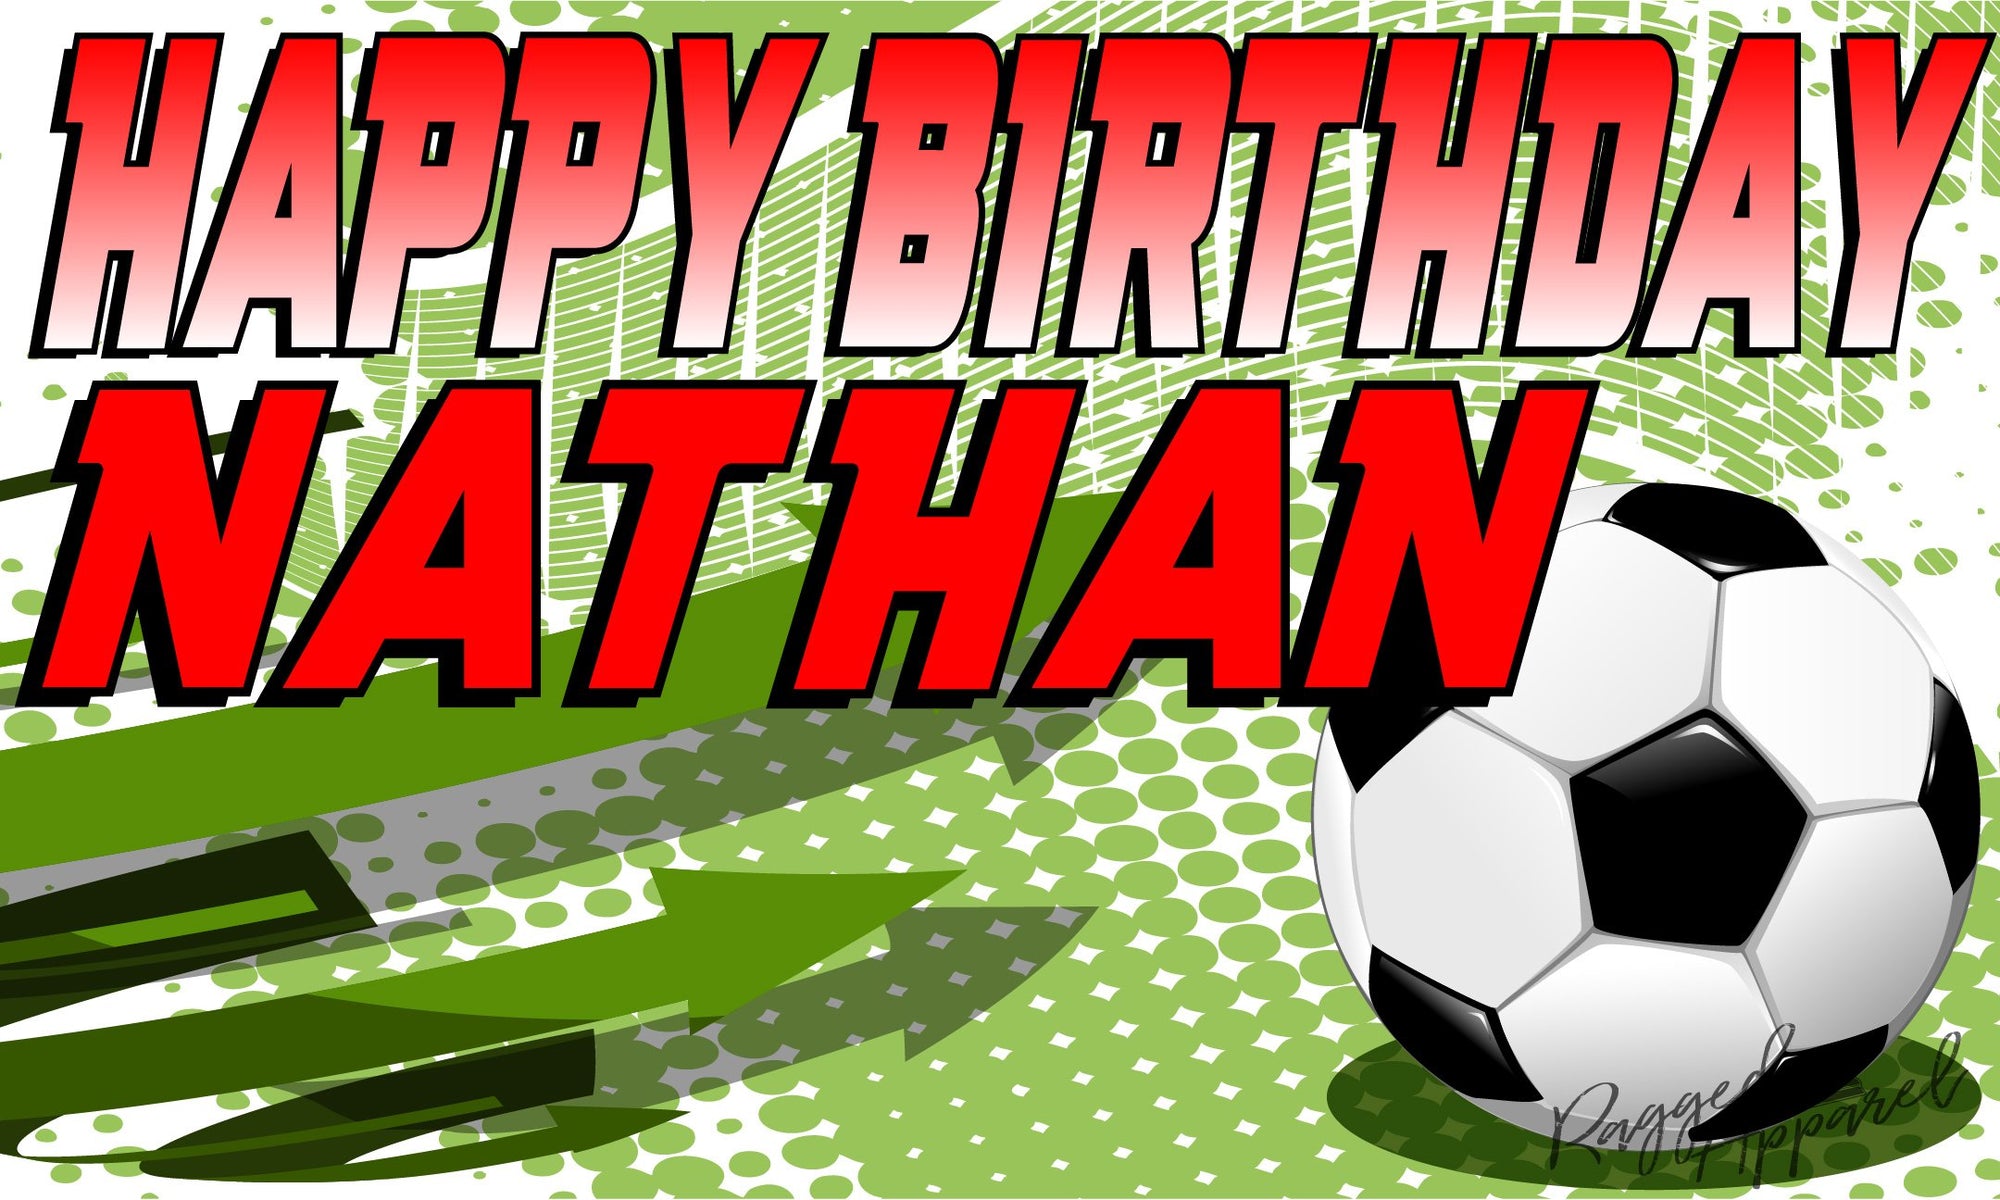 Kids Personalized Soccer Birthday Banner - Ragged Apparel Screen Printing and Signs - www.nmshirts.com